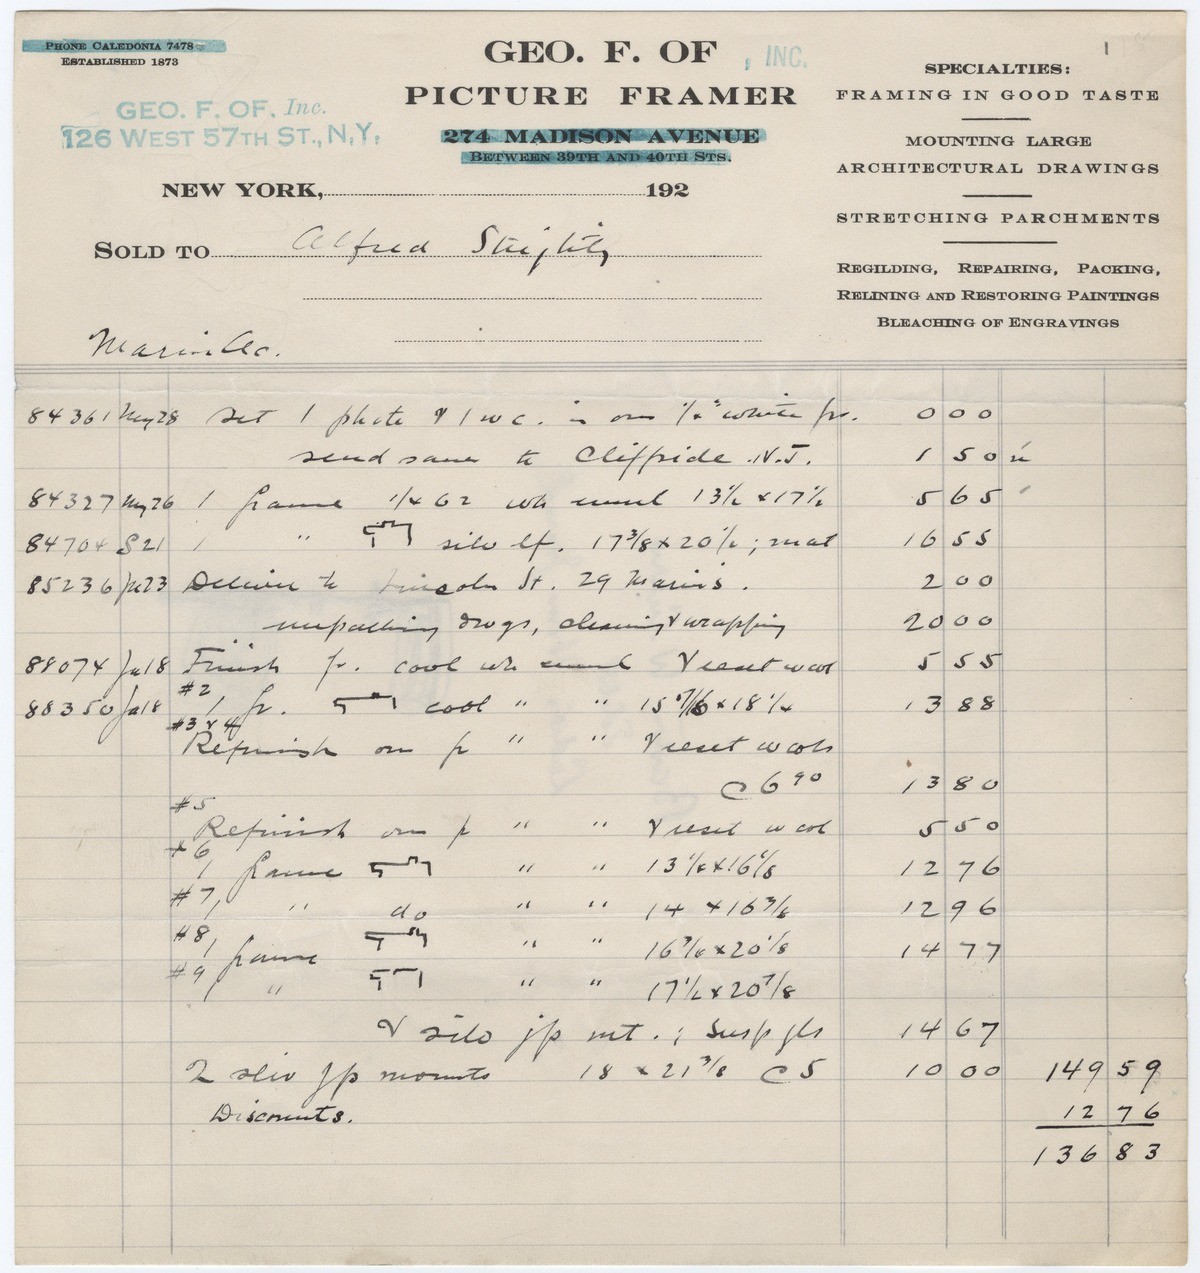 A bill made out to Alfred Stieglitz for materials and framing of paintings by John Marin.